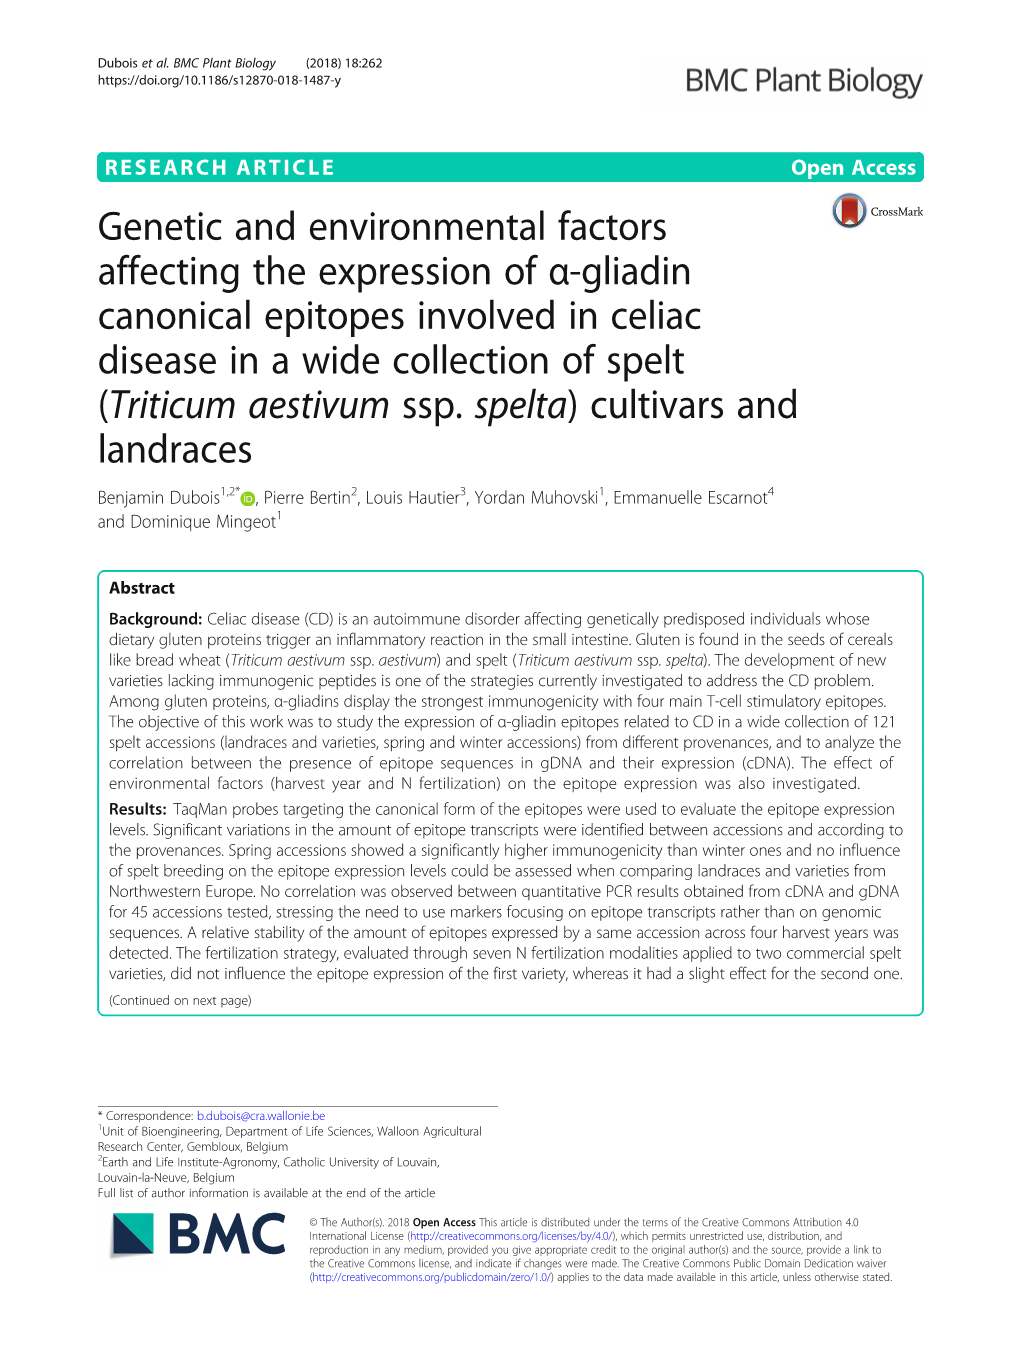 Genetic and Environmental Factors Affecting the Expression of Α-Gliadin